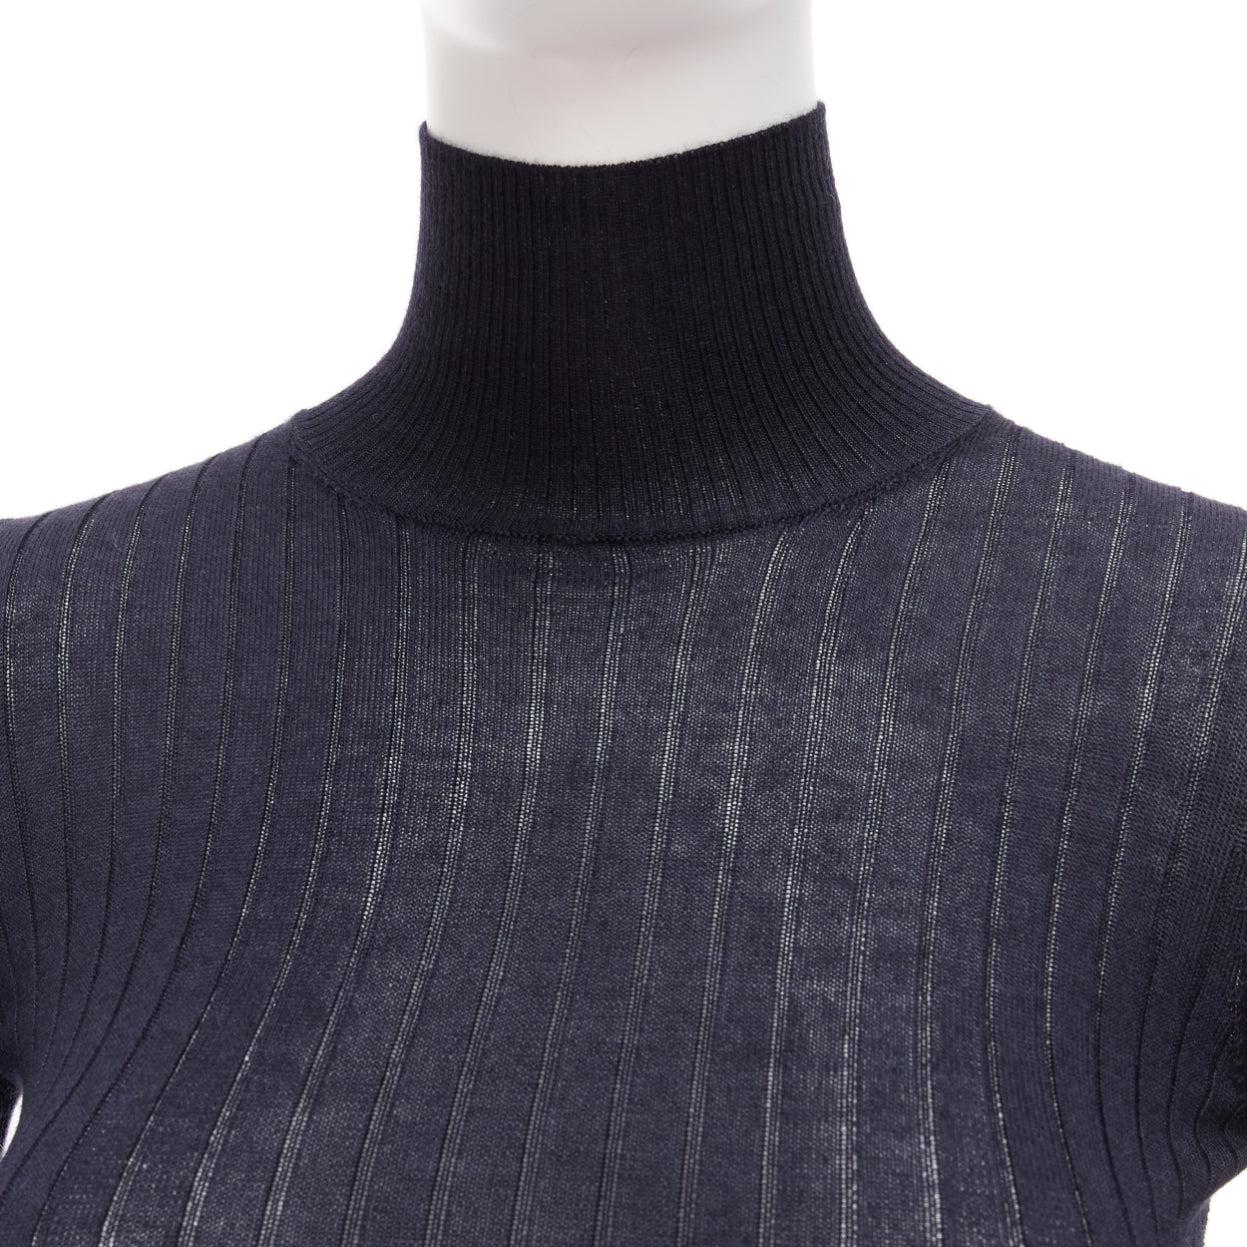 CHRISTIAN DIOR navy cashmere silk fine knit ribbed turtleneck sweater FR34 XS
Reference: AAWC/A00651
Brand: Christian Dior
Designer: Maria Grazia Chiuri
Material: Cashmere, Silk
Color: Navy
Pattern: Solid
Extra Details: Semi-sheer.
Made in: